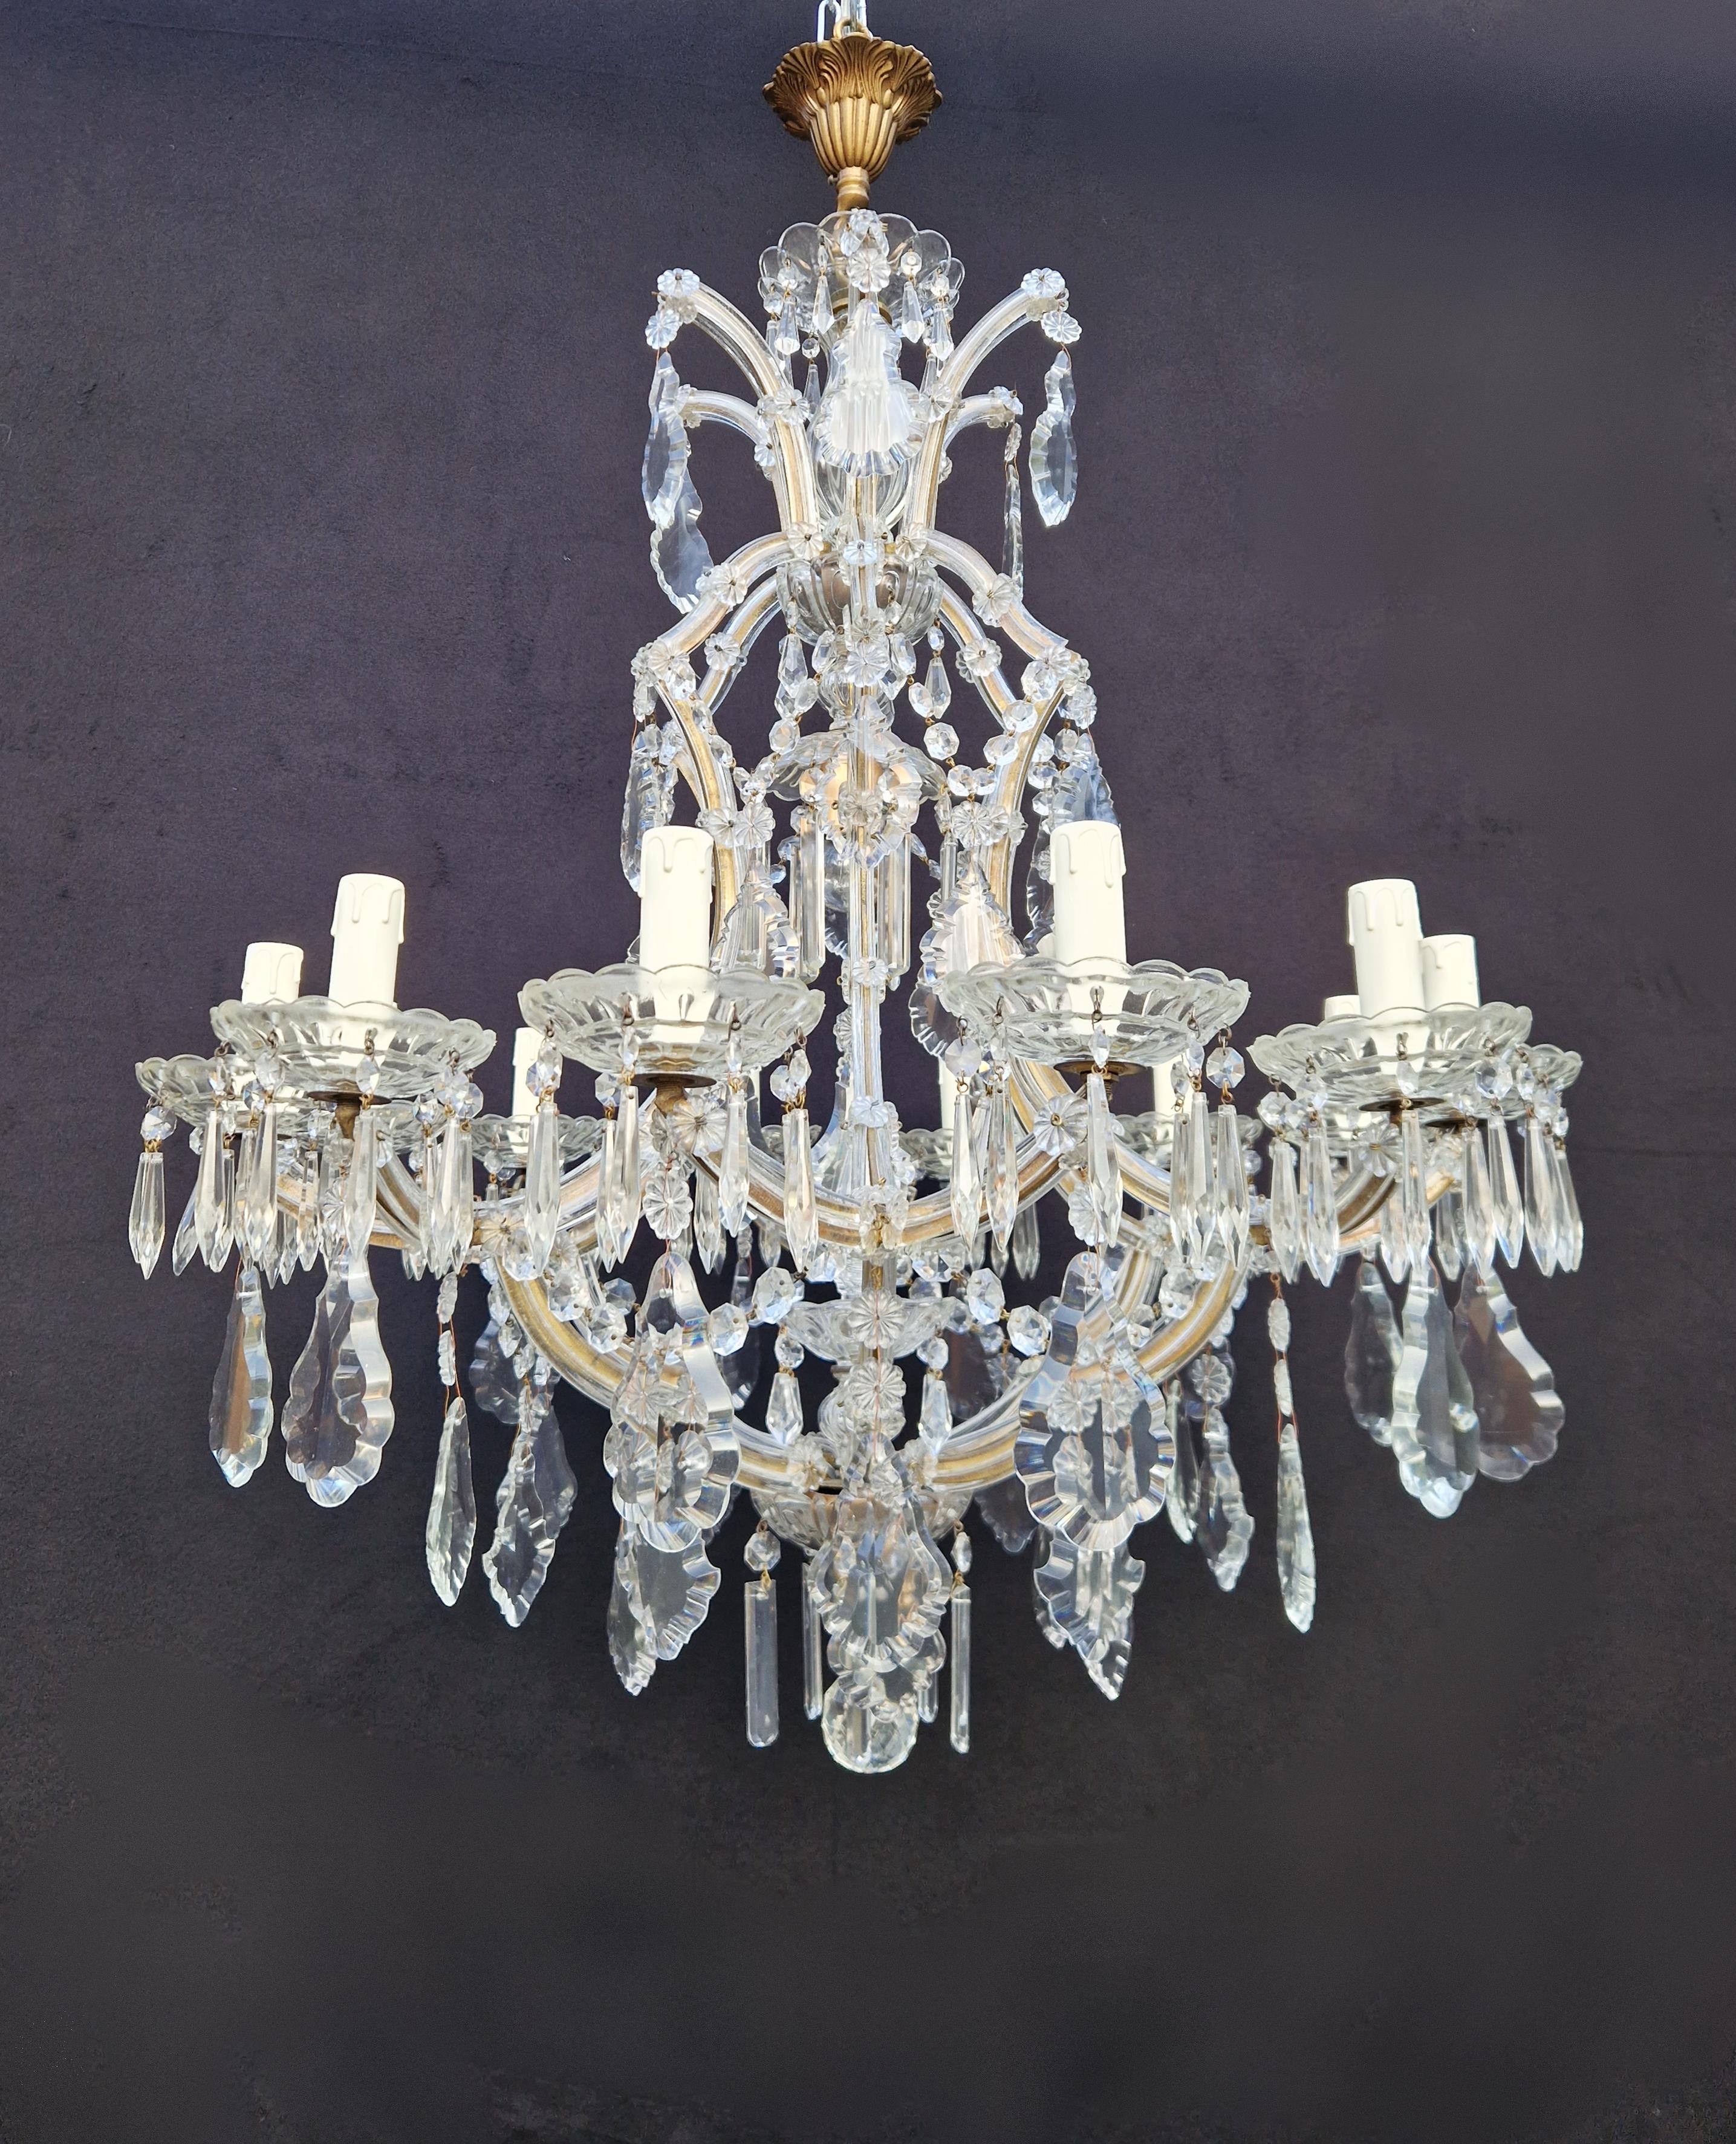 Presenting our beloved old chandelier, lovingly and professionally restored in Berlin. Its electrical wiring is suitable for use in the US, as it has been re-wired and is ready to be hung. Not a single crystal is missing, and each one has been